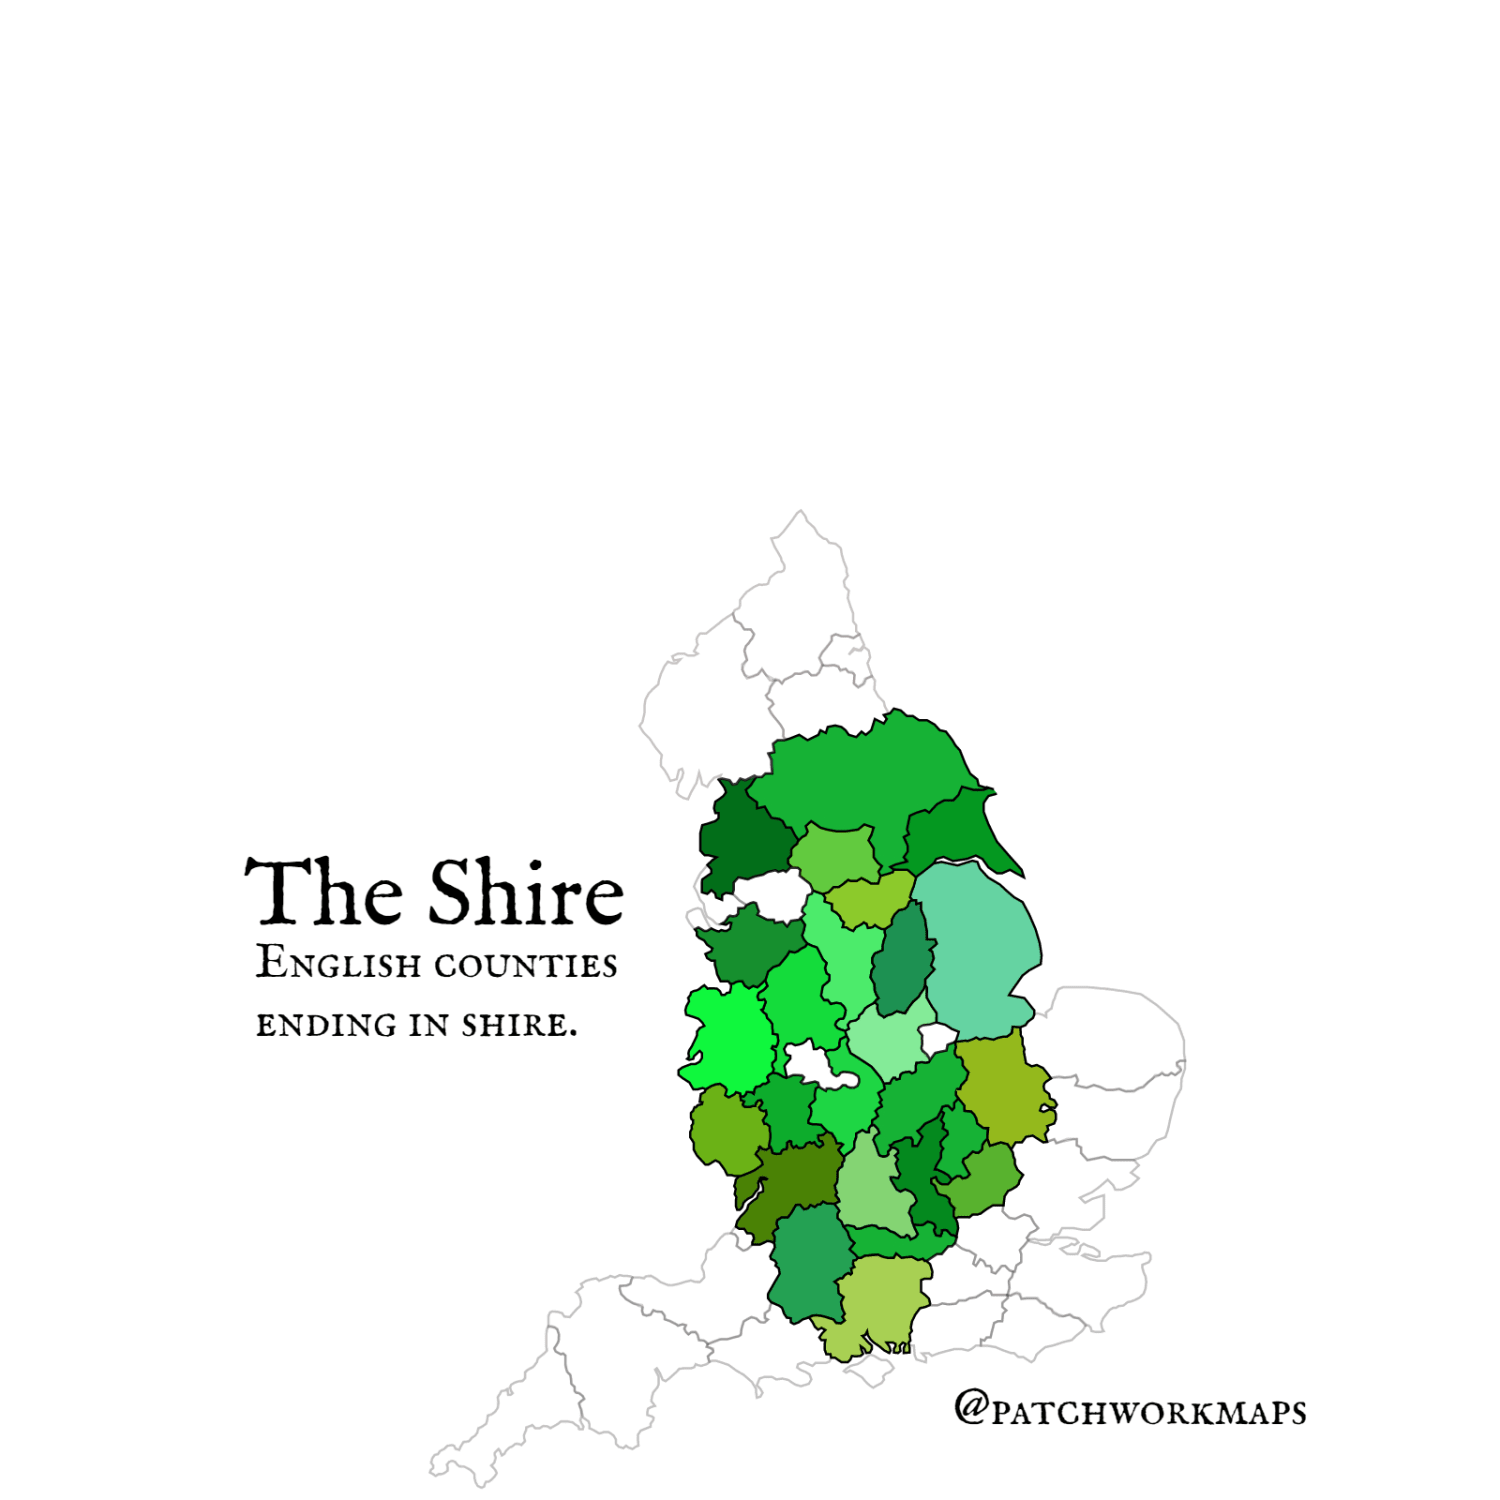 The Shire - English counties ending in 'shire'